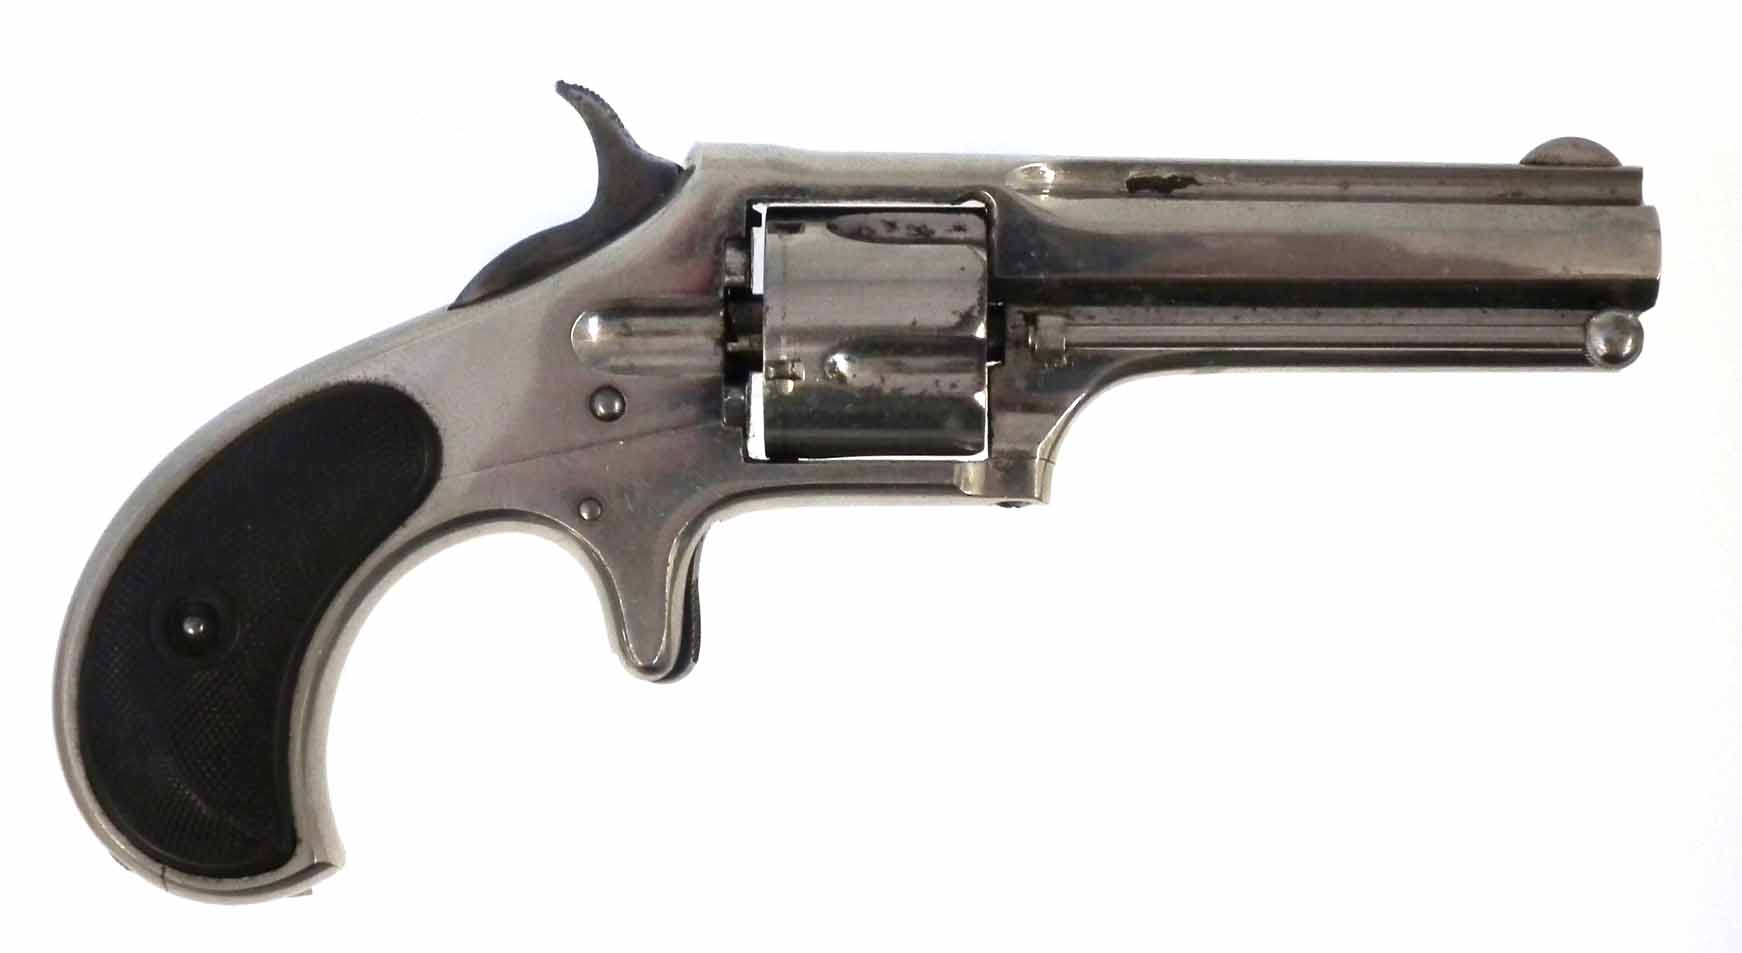 Remington Smoot single action revolver, with nickel plated body, colour case hardened hammer, and